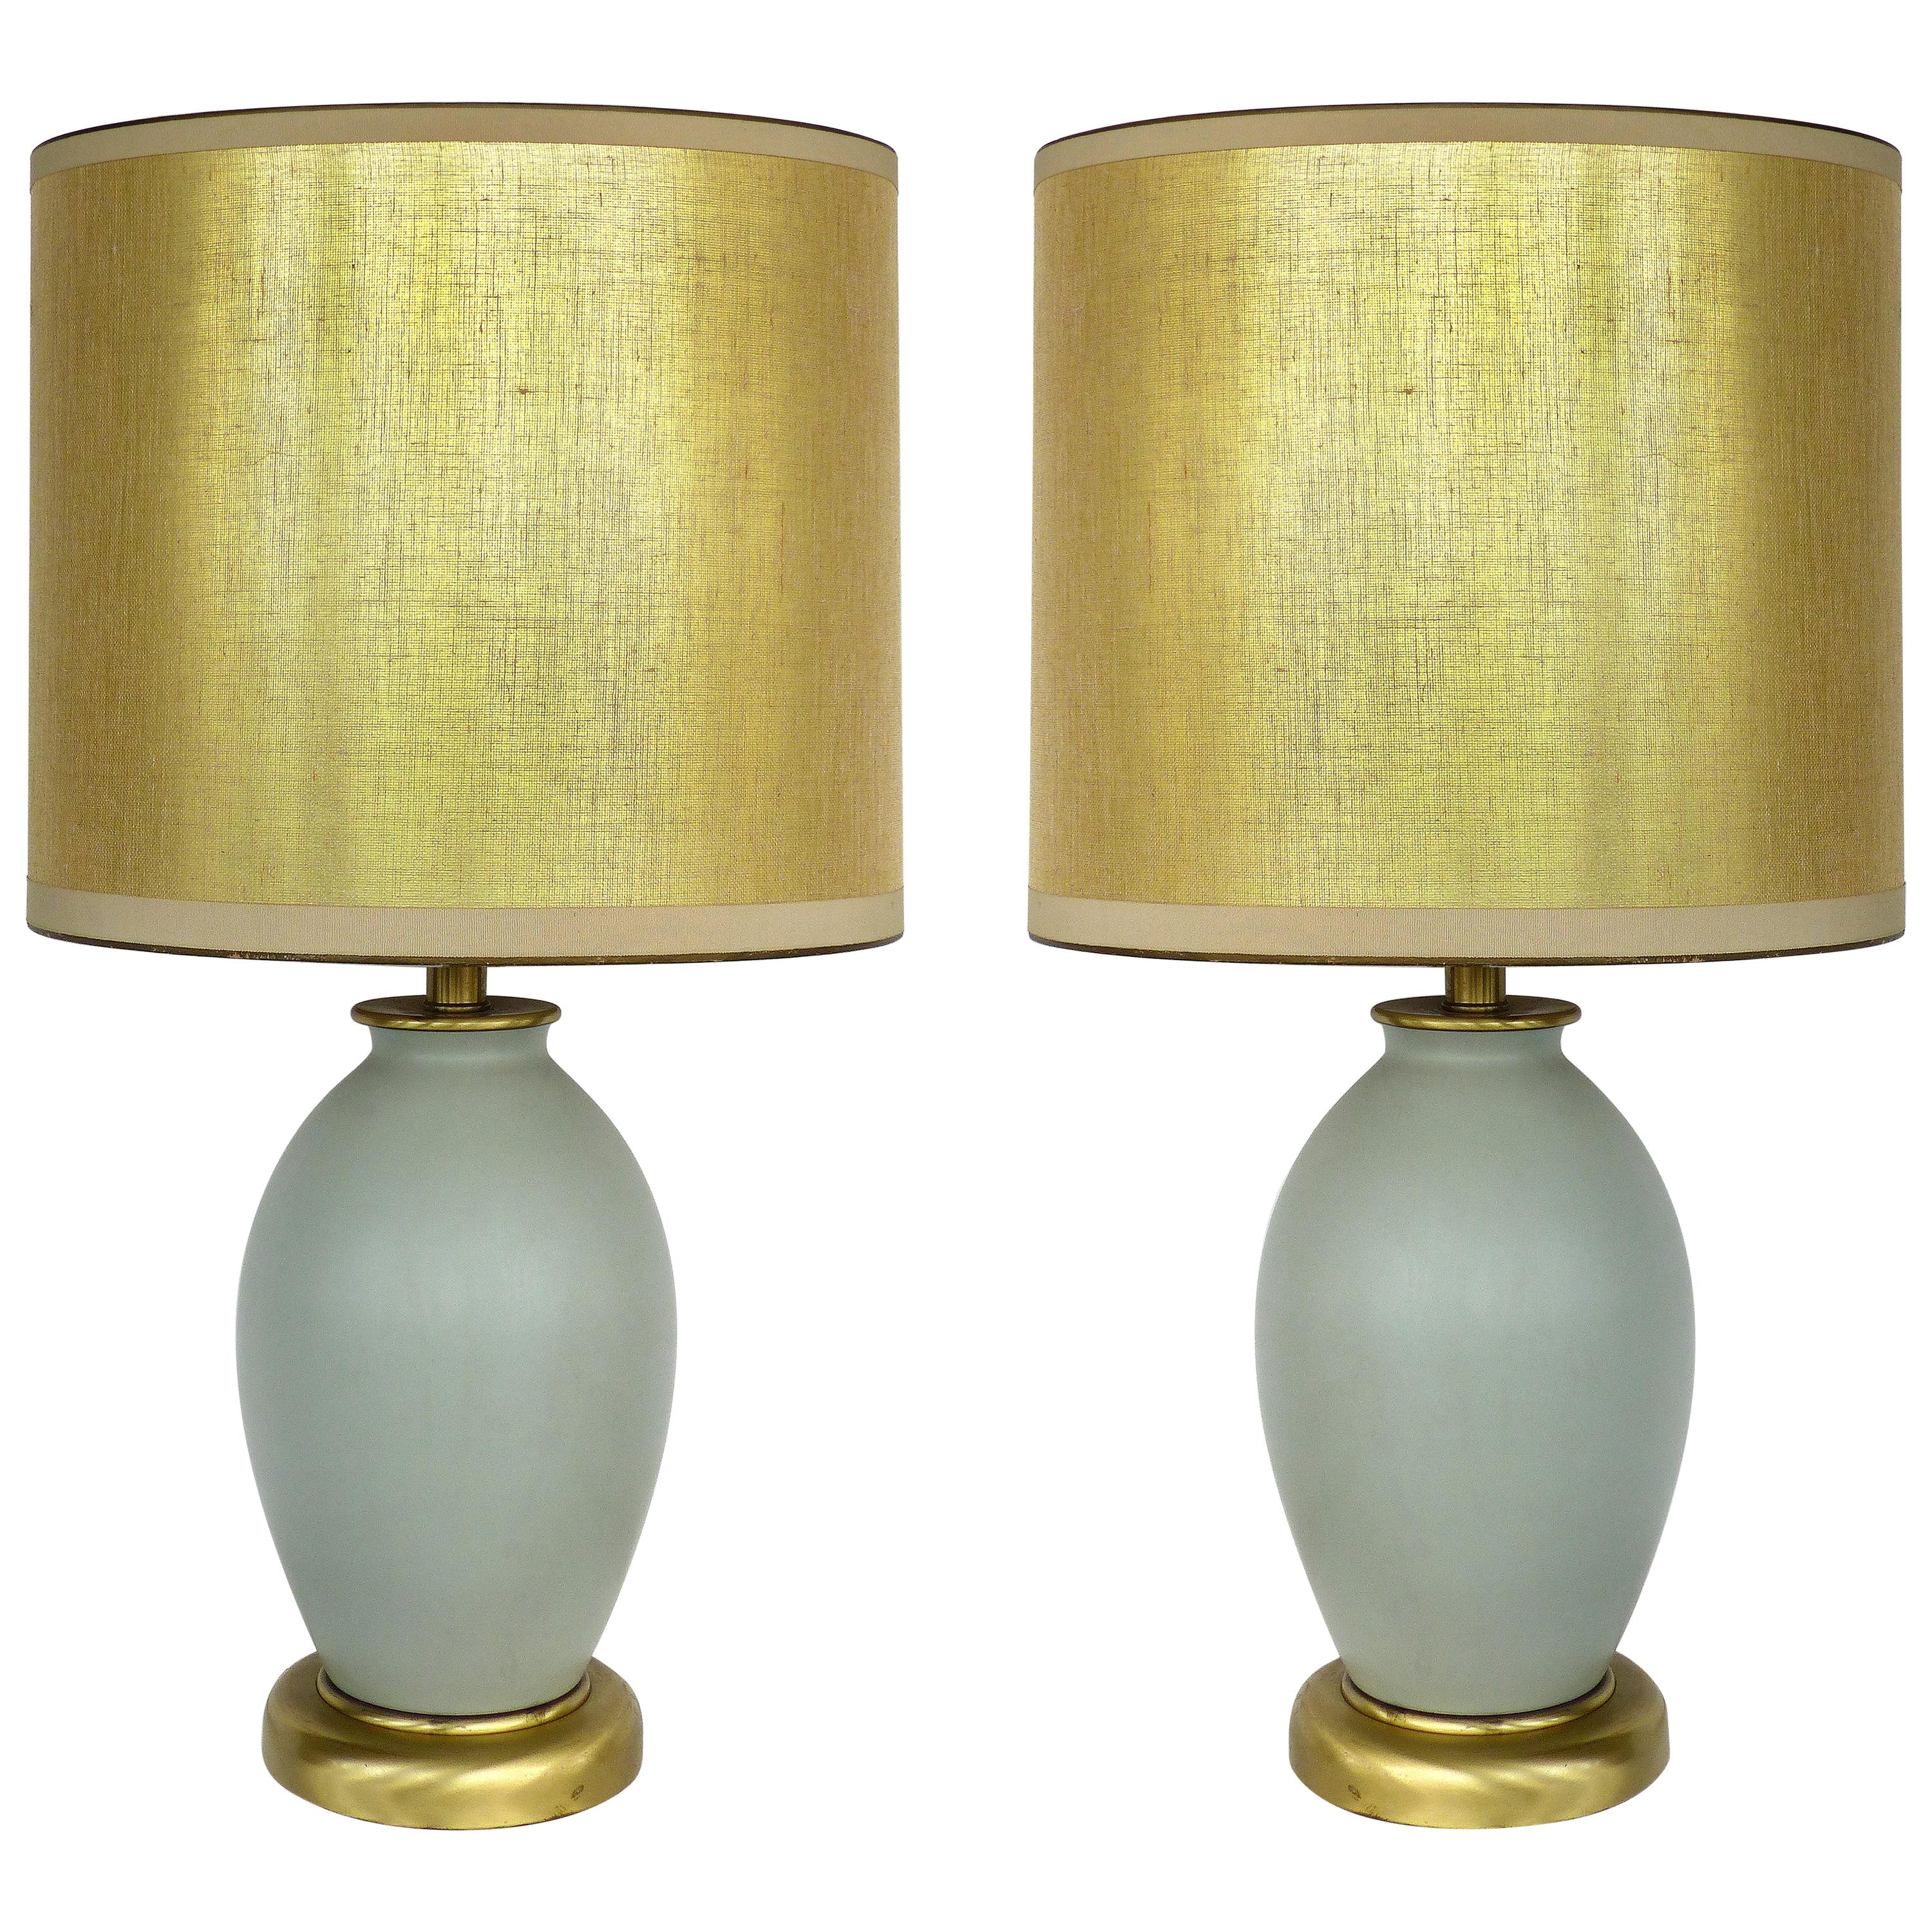 Celadon Ceramic Lamps with Shades and Brass Bases